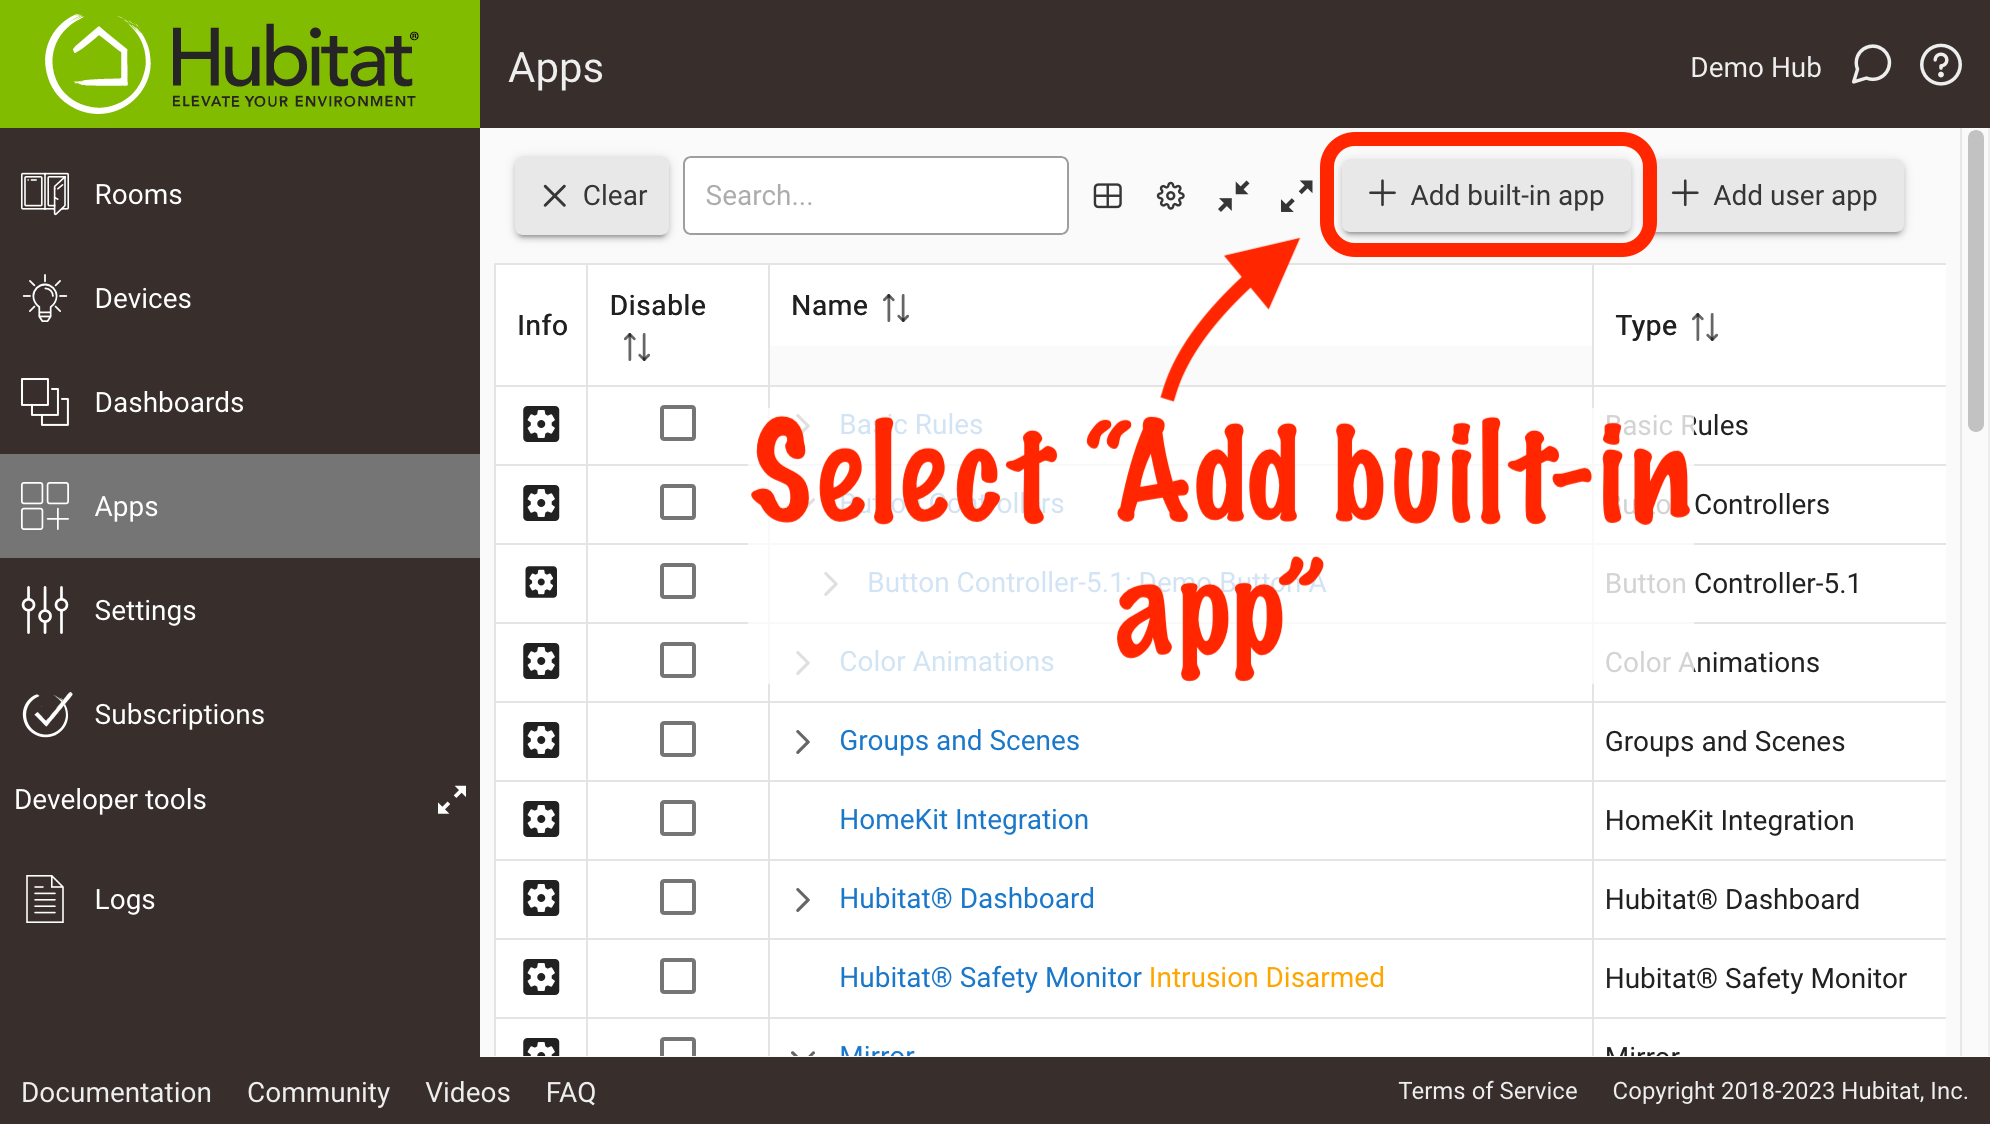 Screenshot of "Add Built-In App" button on Apps page